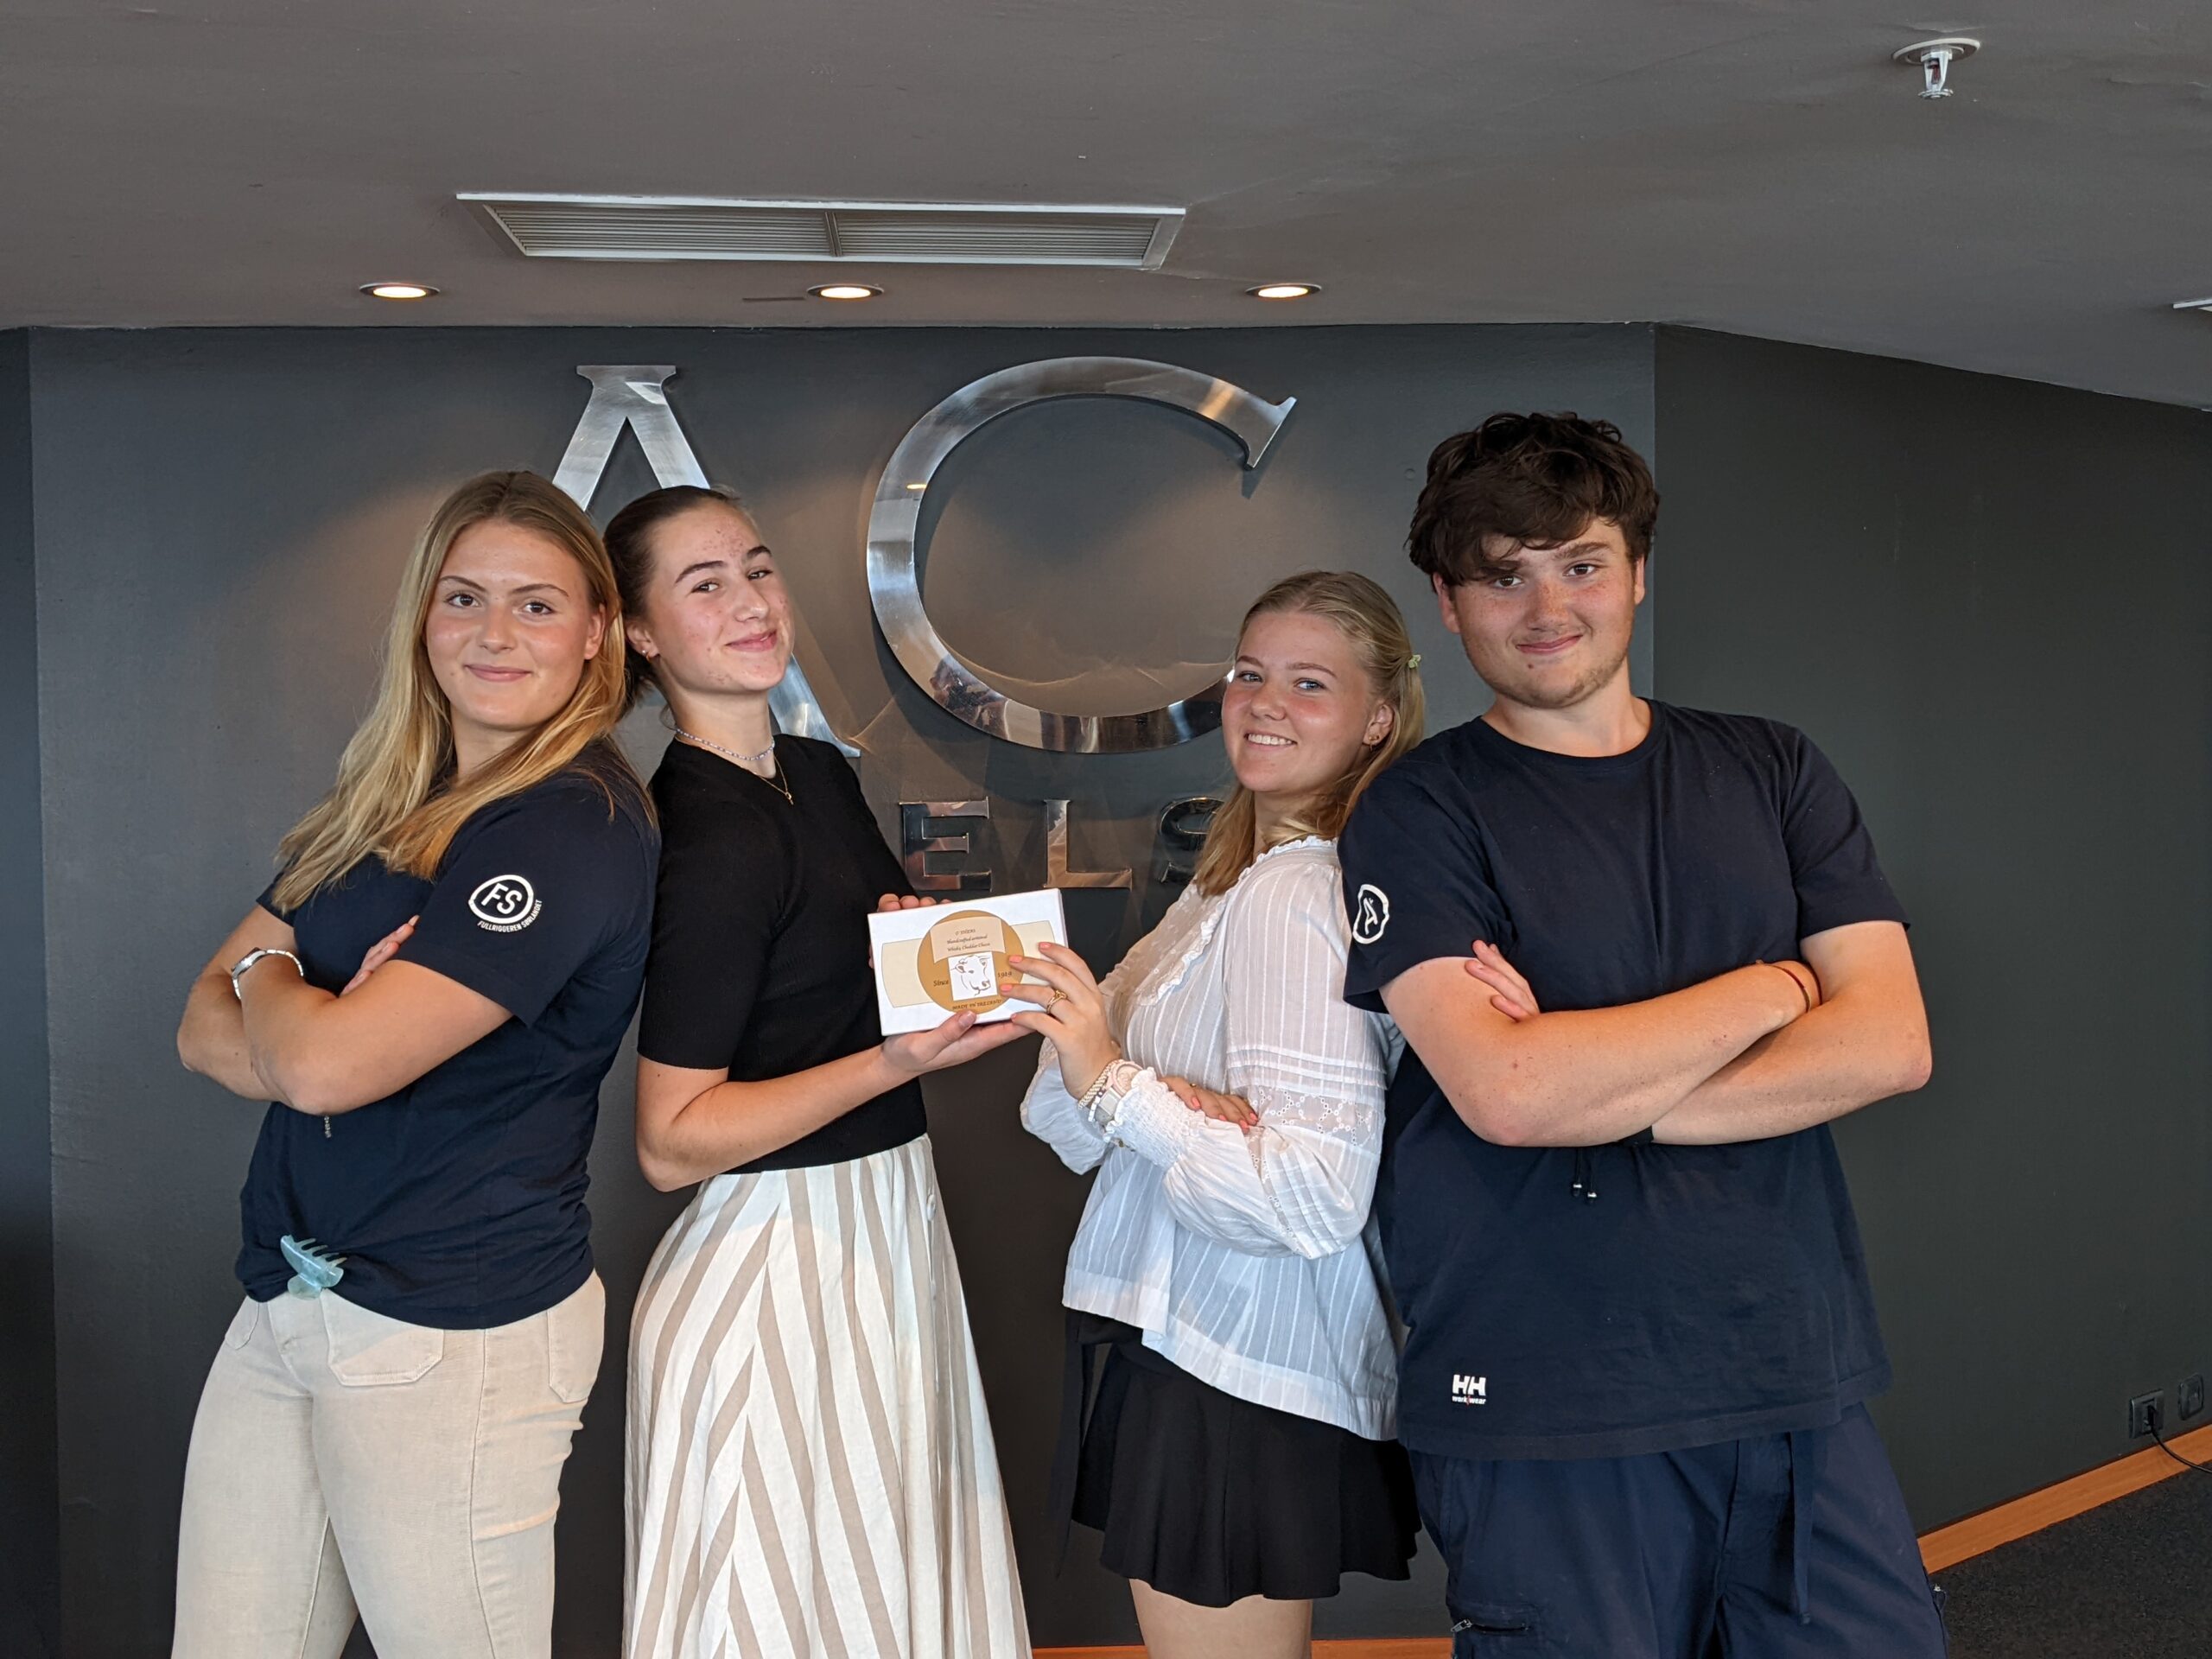 Four students show off their project and hold the final packaging for their product during a business workshop for teenagers (The Golden Ticket Workshop).